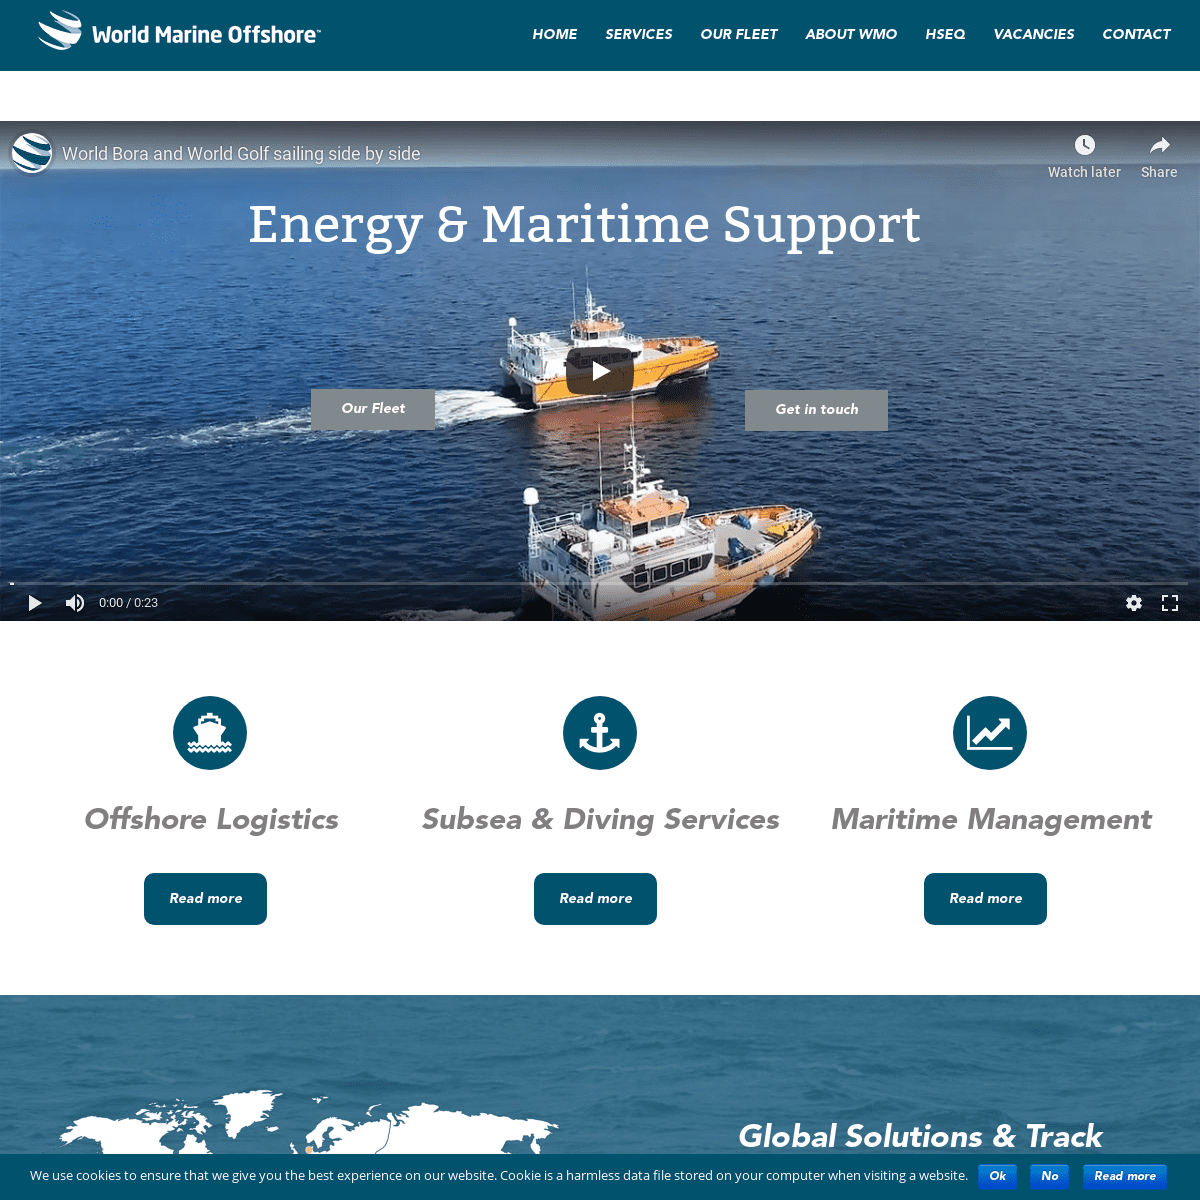 Crew Transfer Vessels (CTV) | Offshore Services | World Marine Offshore